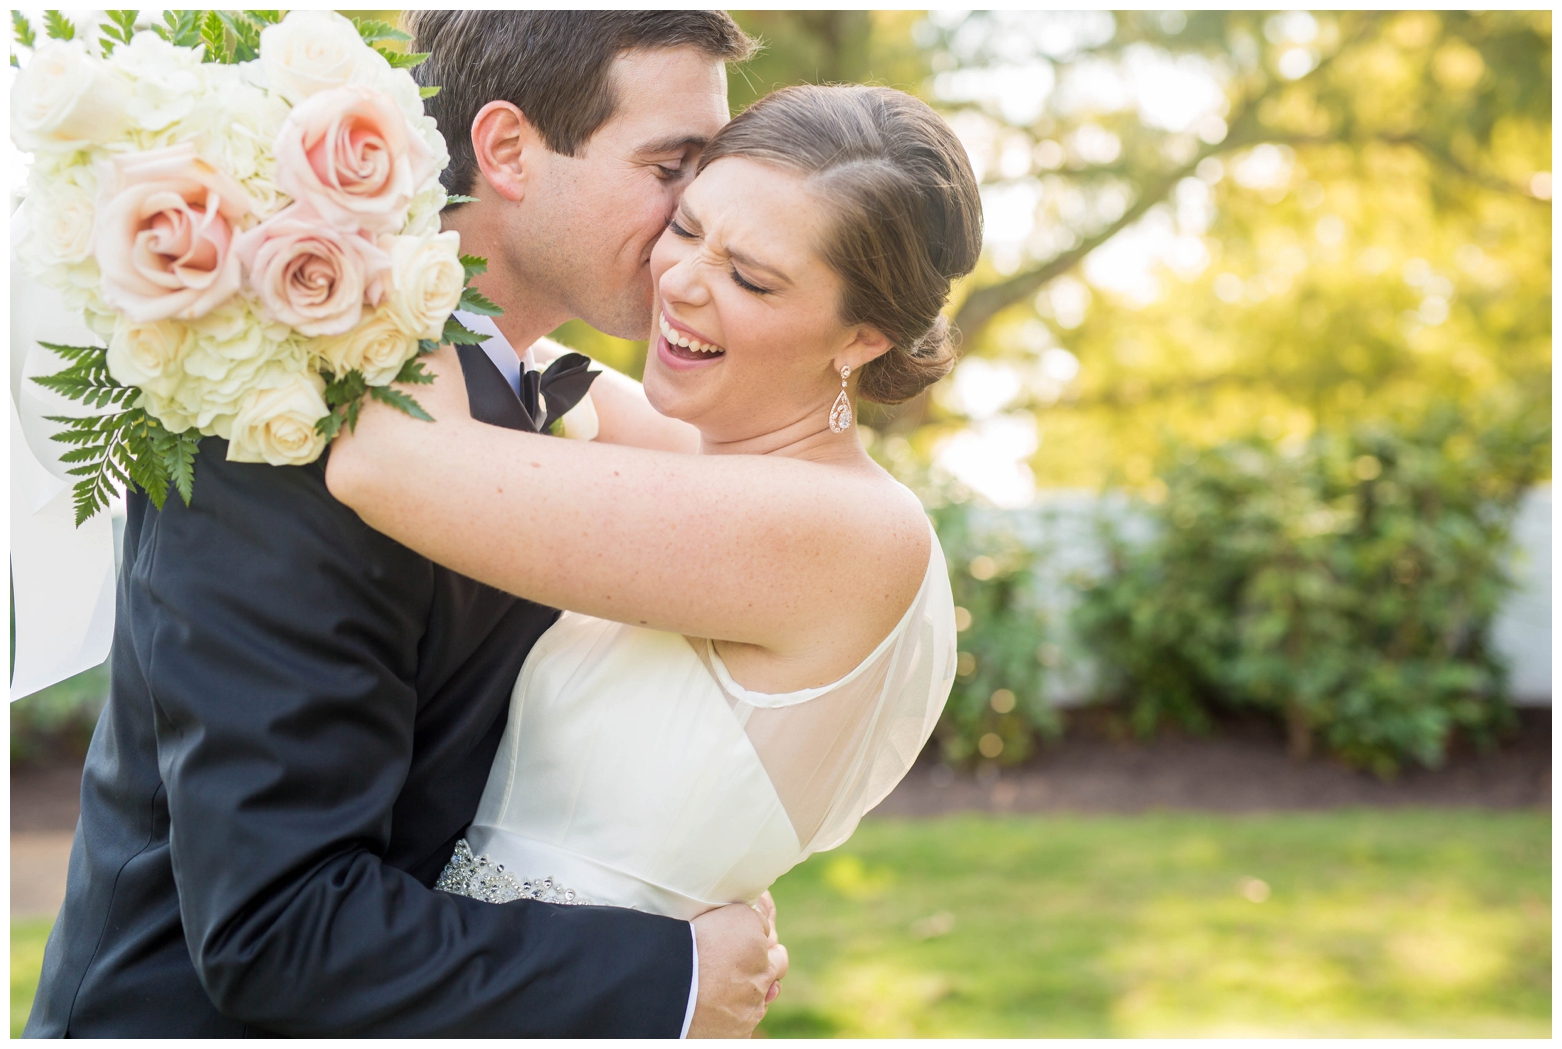 View More: http://hopetaylorphotographyphotos.pass.us/anne-and-eric-wedding